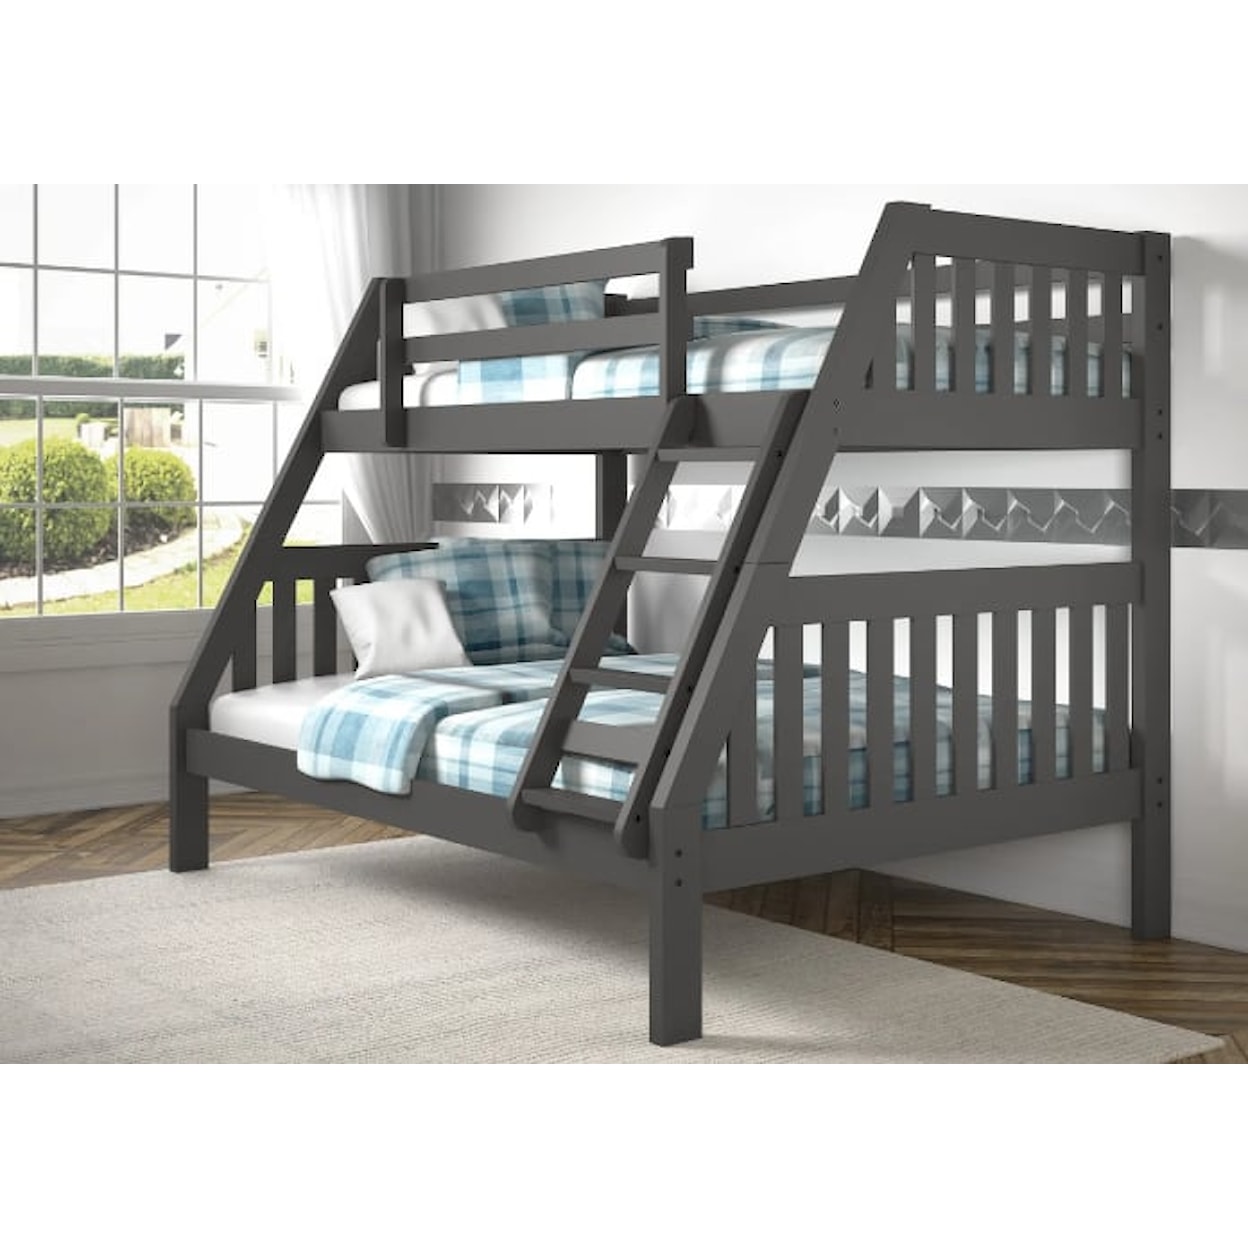 Donco Trading Co Bunkbeds MISSION GREY TWIN/FULL BUNKBED |